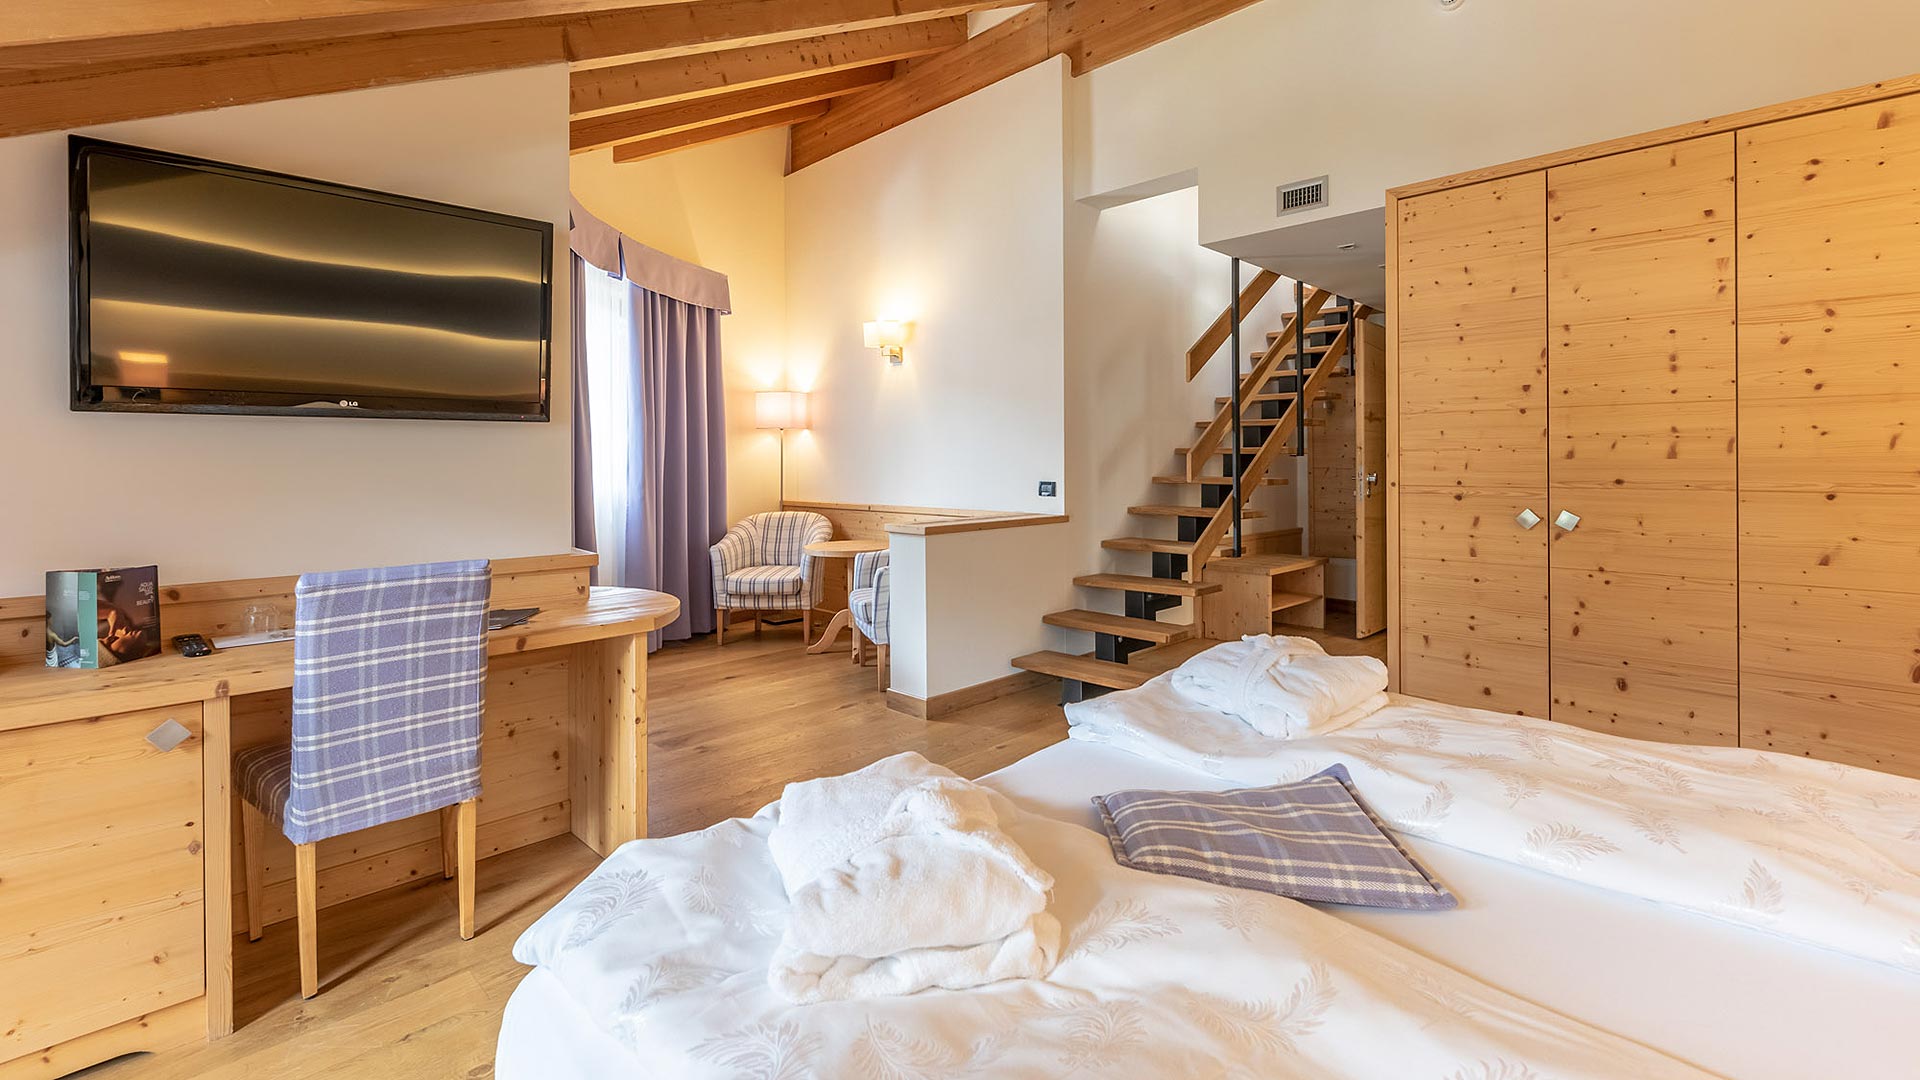 Come and discover our hotel in Val di Sole, Dimaro, where you can sleep well during your stay.